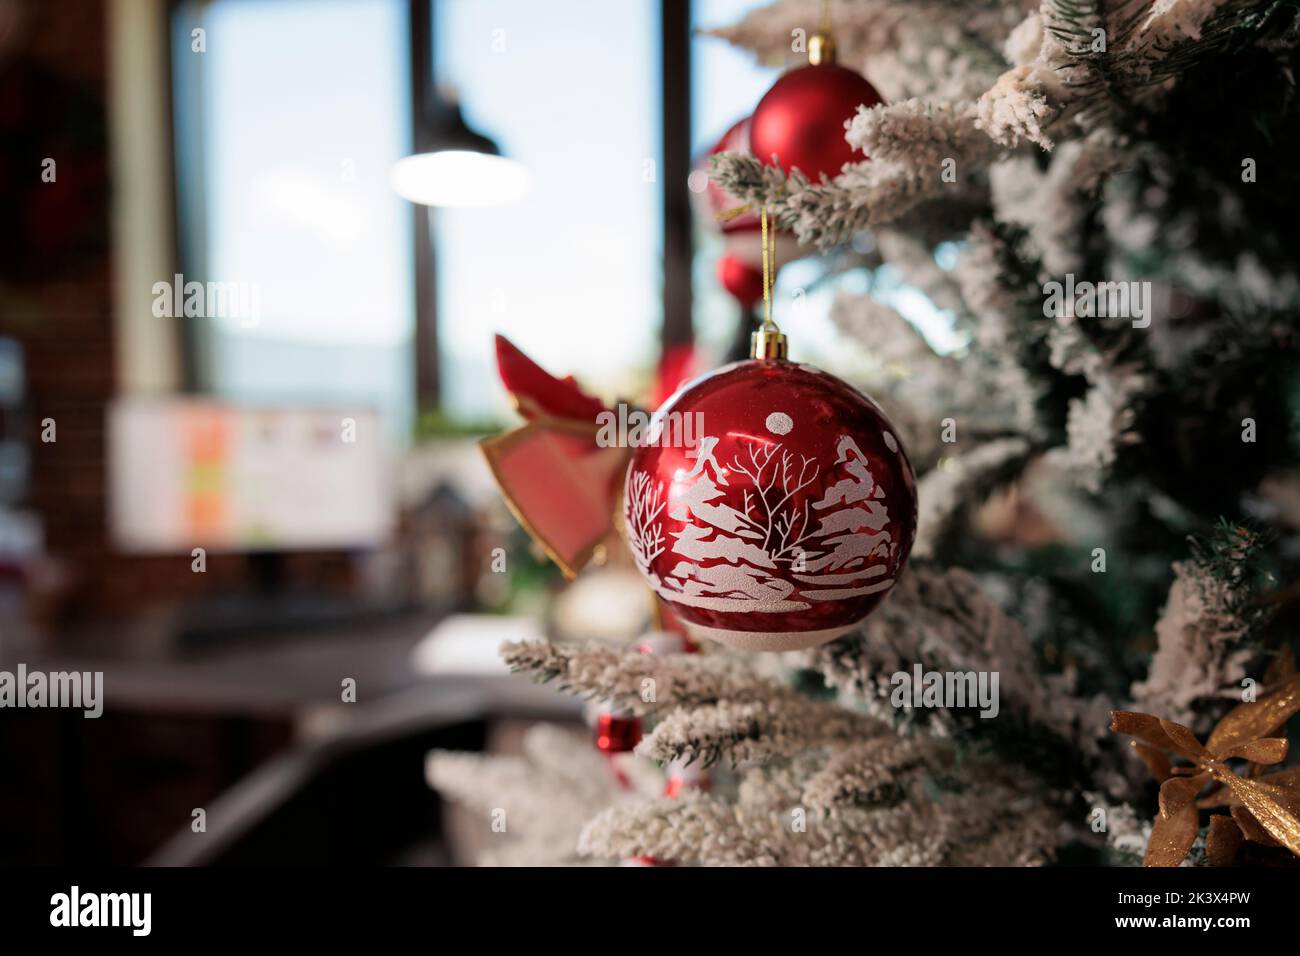 Festive christmas tree in empty business office, decorated with xmas bulbs, bauble, garlaand and tinsel to celebrate seasonal winter holiday. Startup workplace with ornaments and decor. Close up. Stock Photo